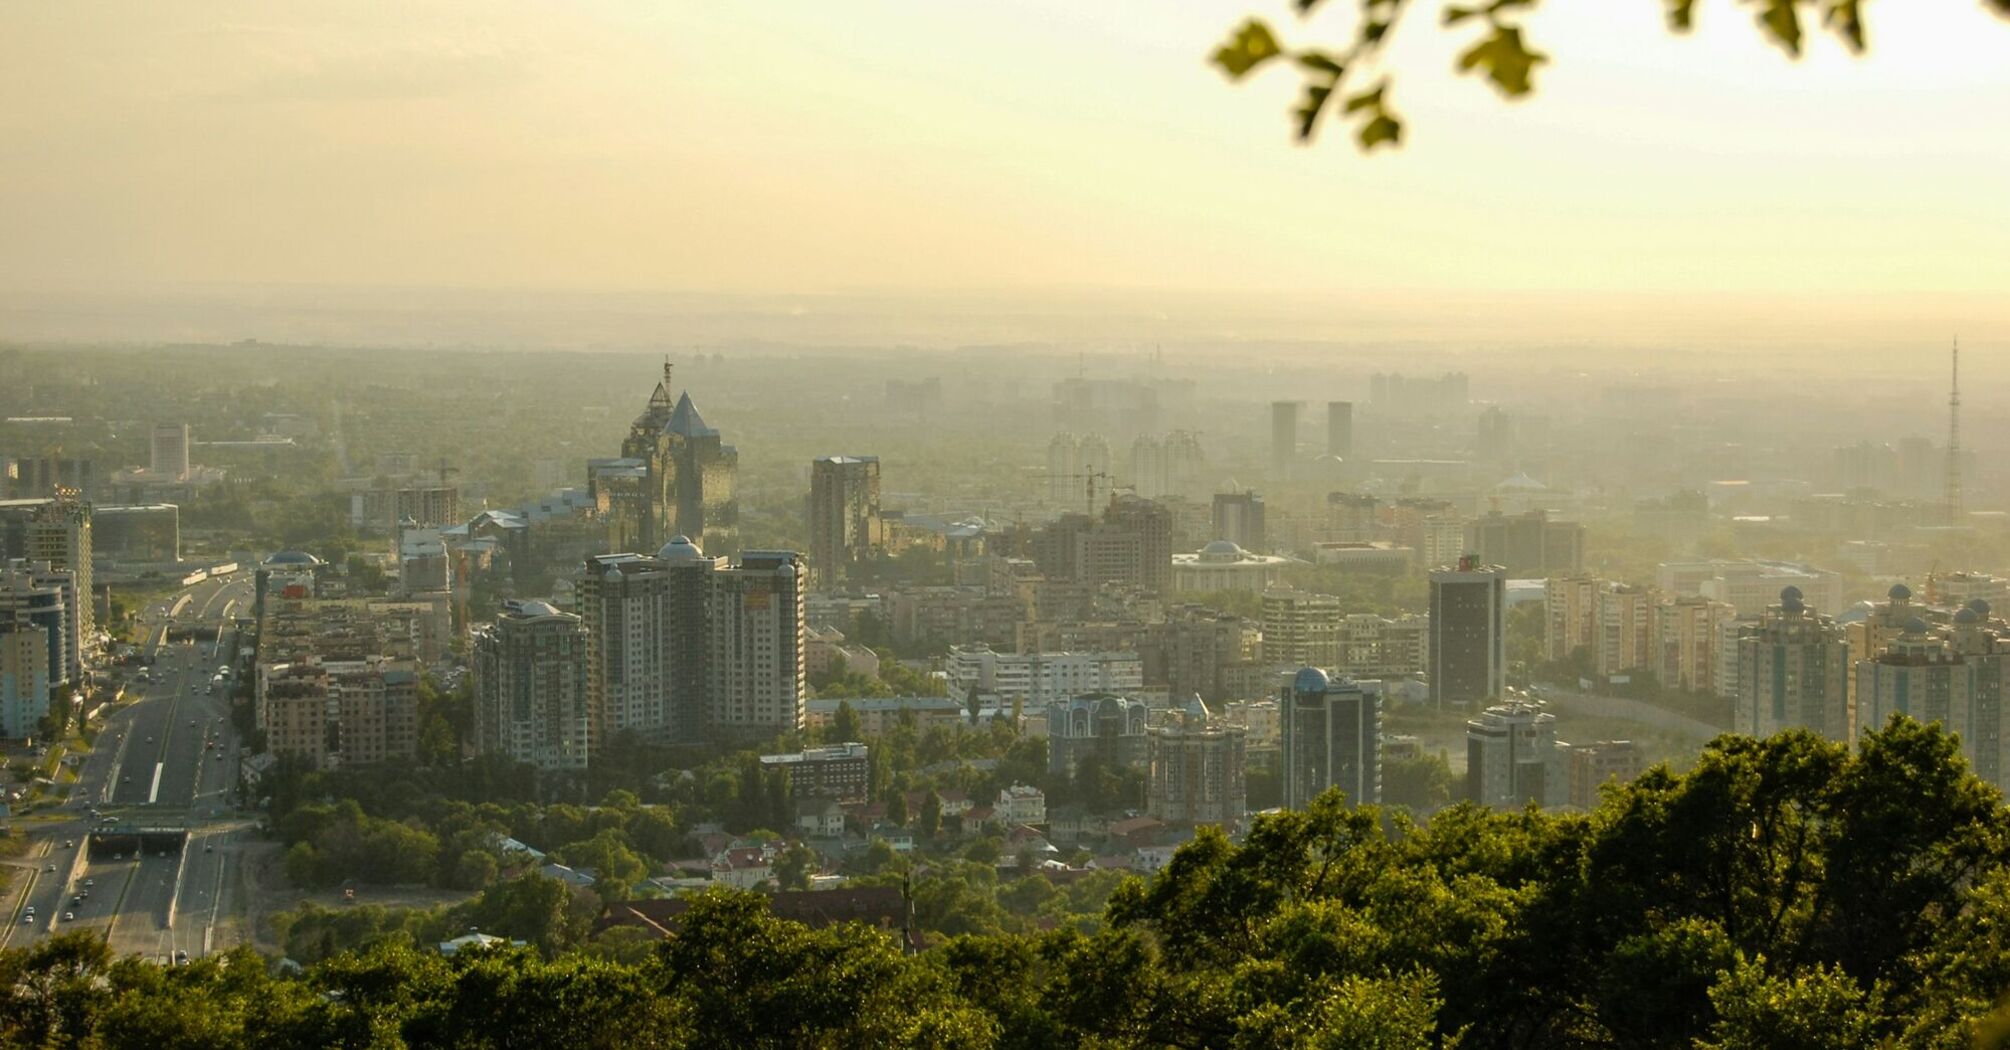 A hazy sunrise view over the sprawling cityscape of Almaty, Kazakhstan, with modern buildings silhouetted against the soft morning light, framed by foreground leaves